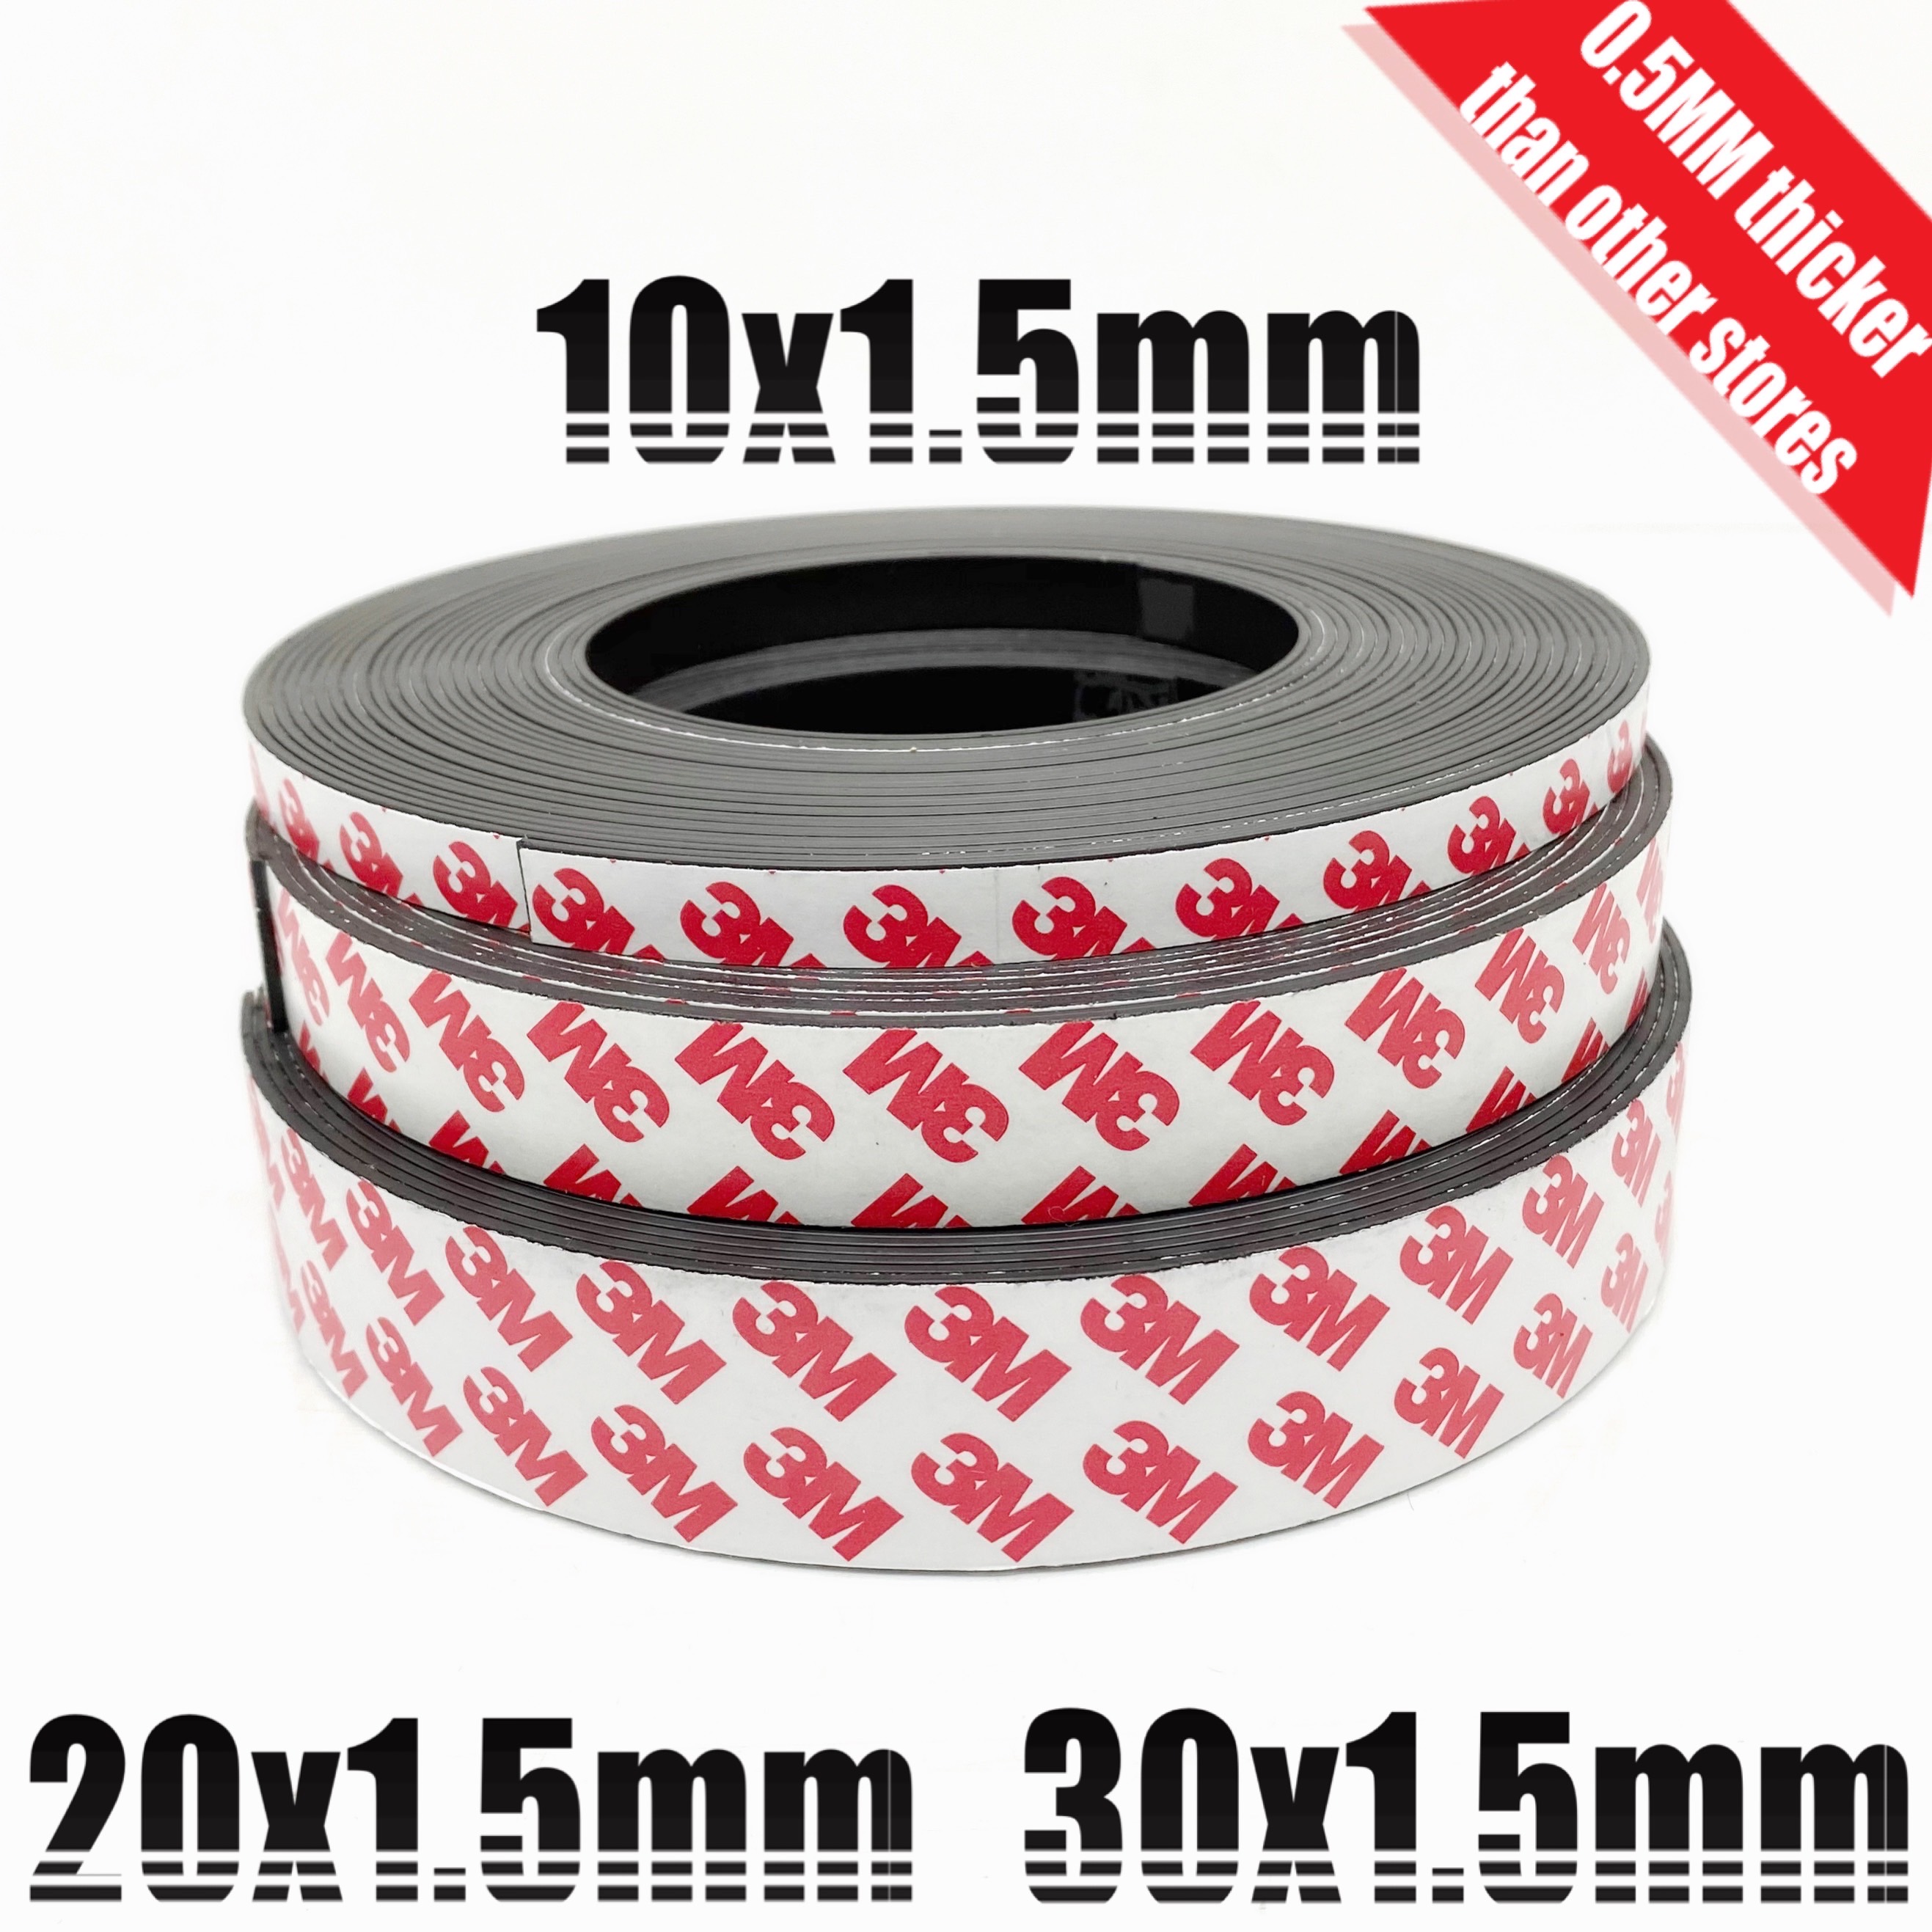 1M Self Adhesive Magnetic Strip Strong Magnet Tapes 1M x 10MM x 1.5MM 